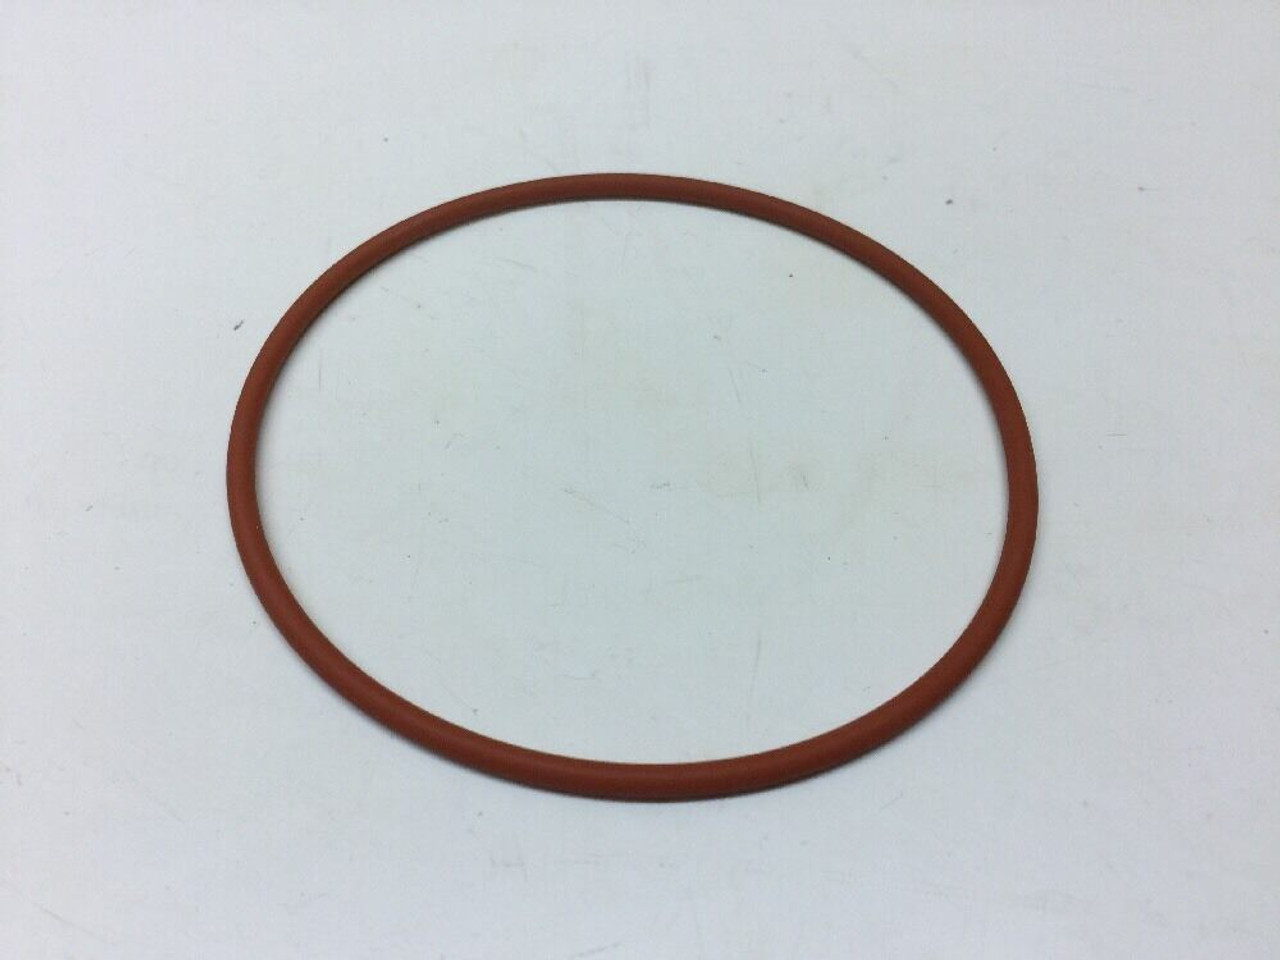 Red Rubber O-Ring MS9068-150 Rubber Silicone